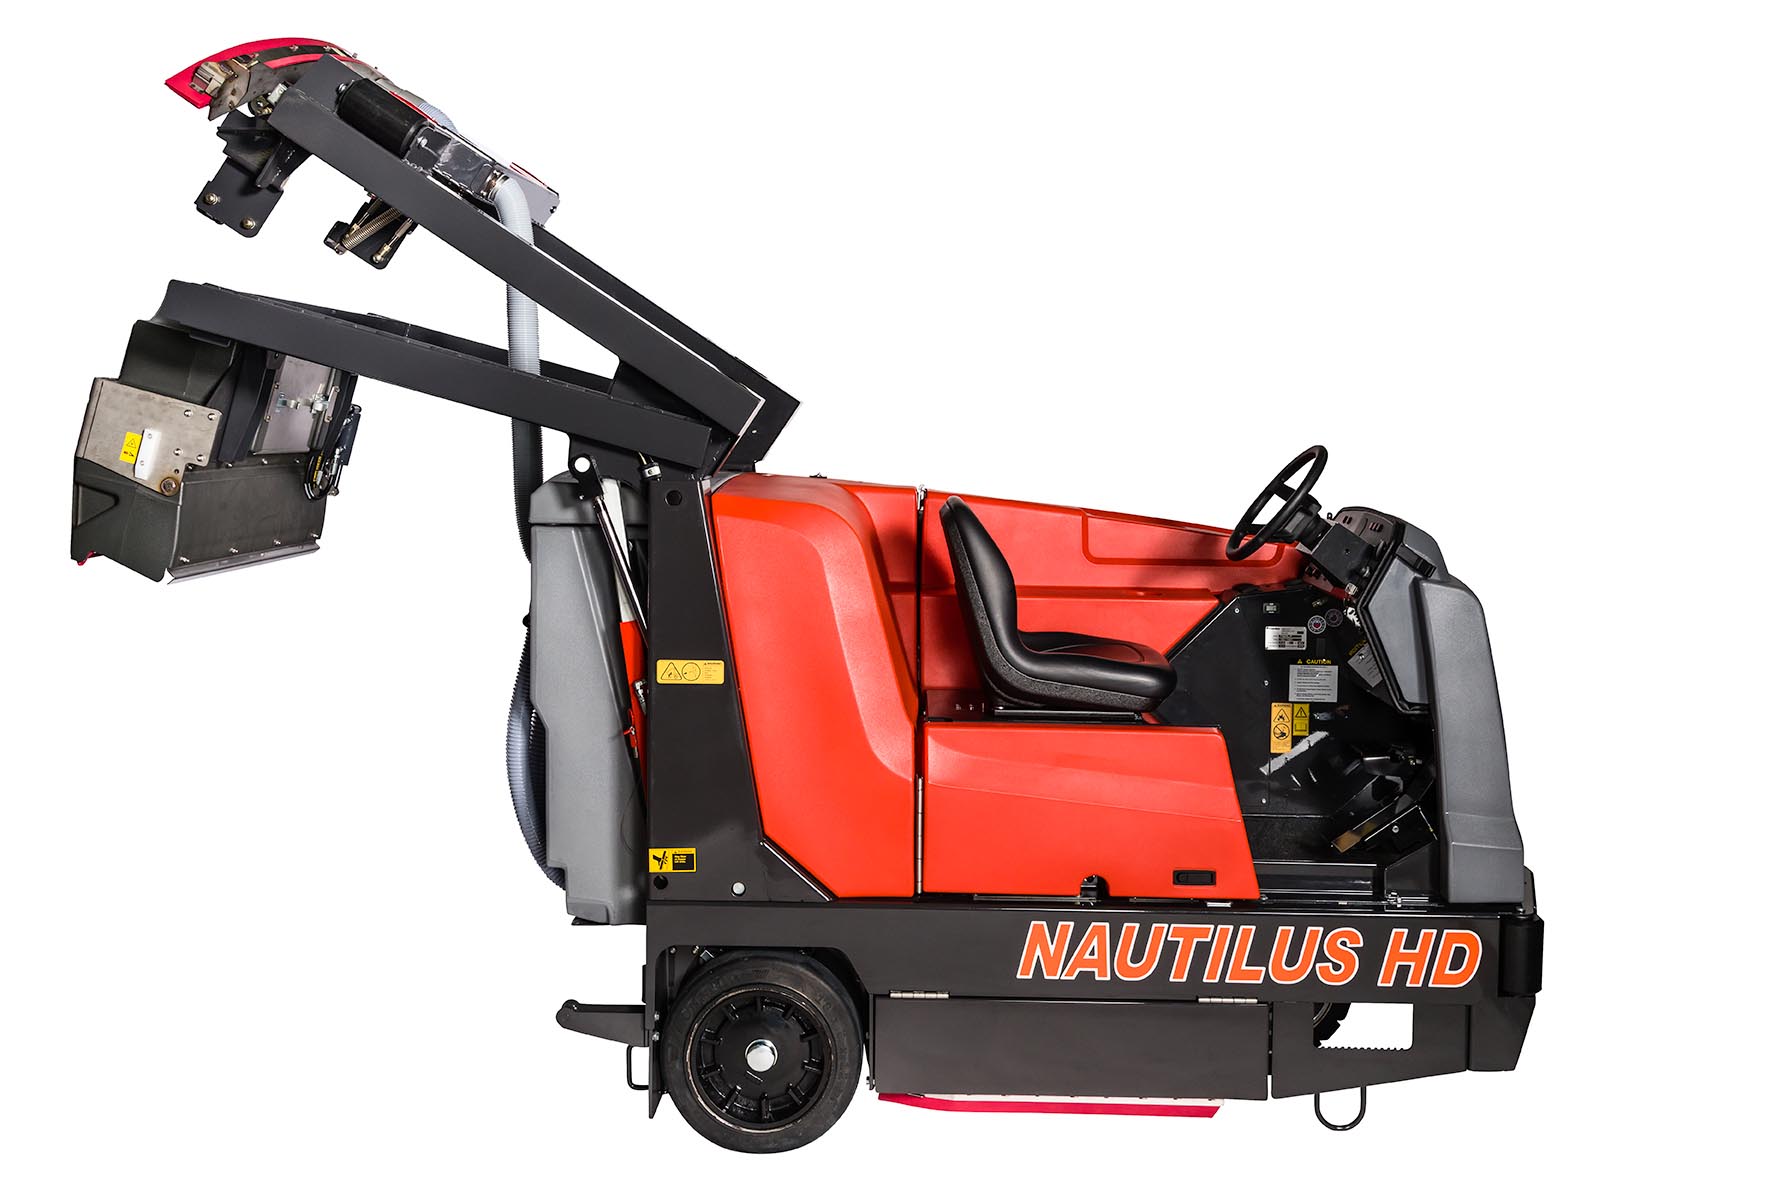 PowerBoss Nautilus High-Dump Scrubber Sweeper for Commercial Parking Lots & Garages